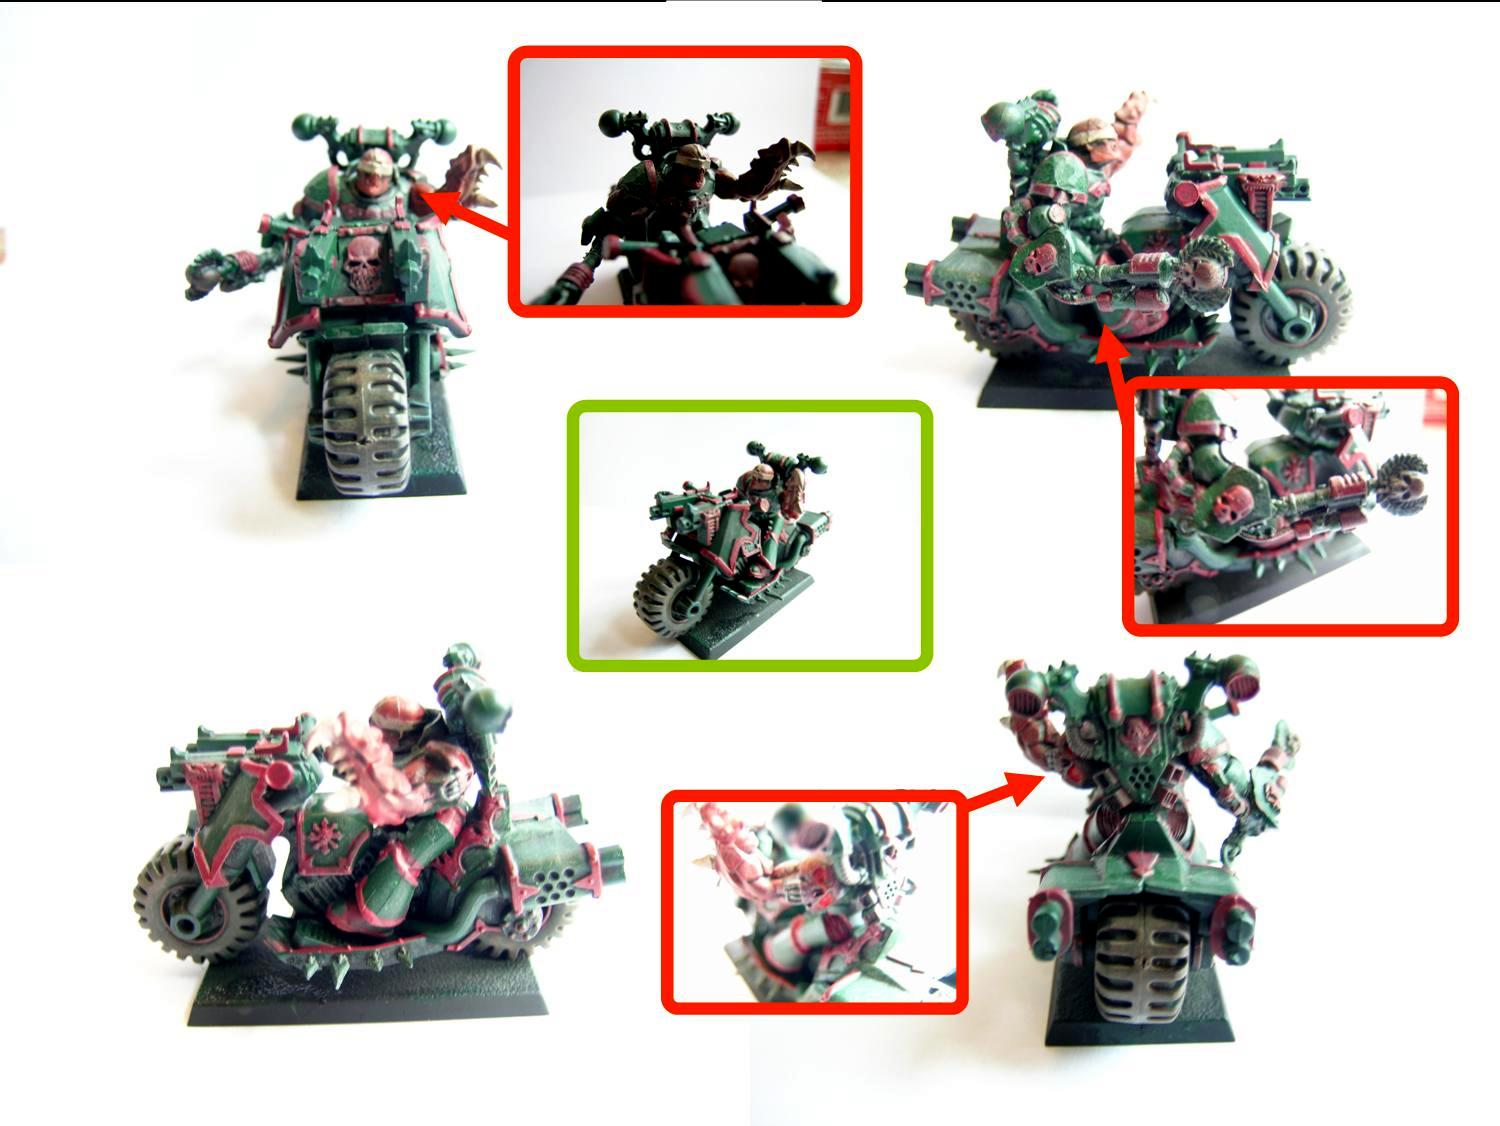 Bike, Chaos, Cool, Painted, Space, Space Marines